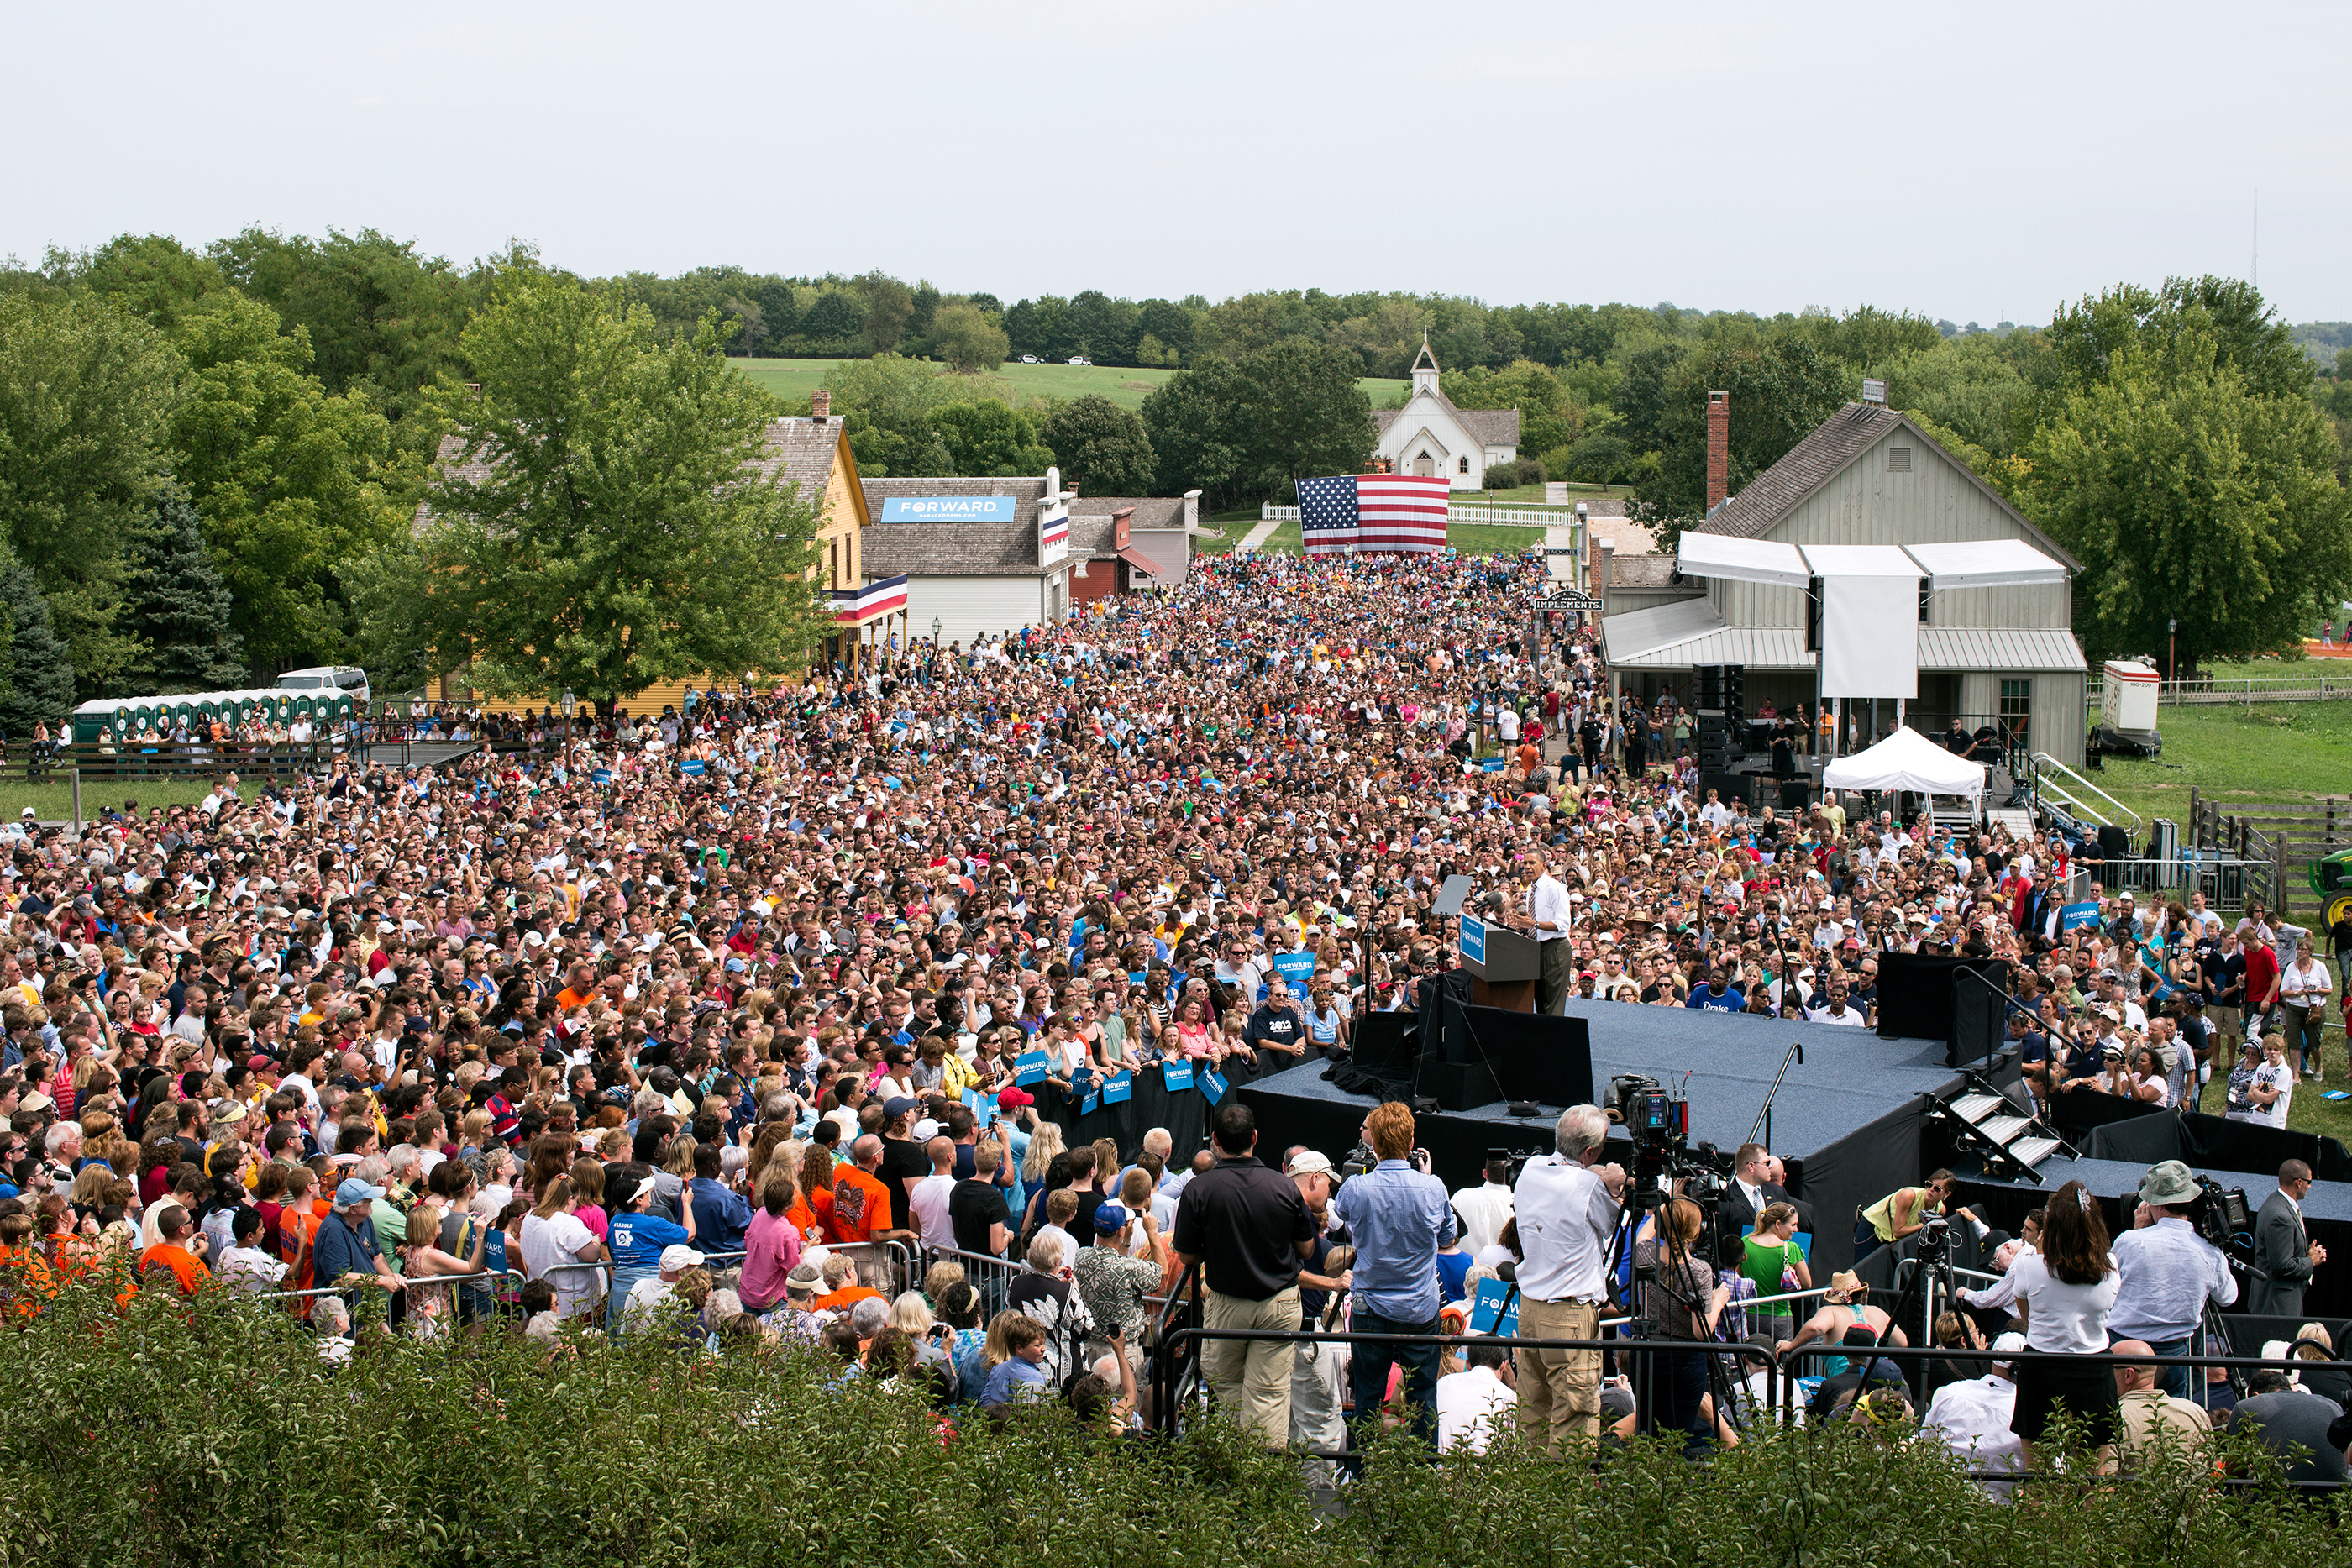 Iowa, Sept. 2012. Speaking at a grassroots campaign event at Living History Farms in Urbandale. (Official White House Photo by Pete Souza)